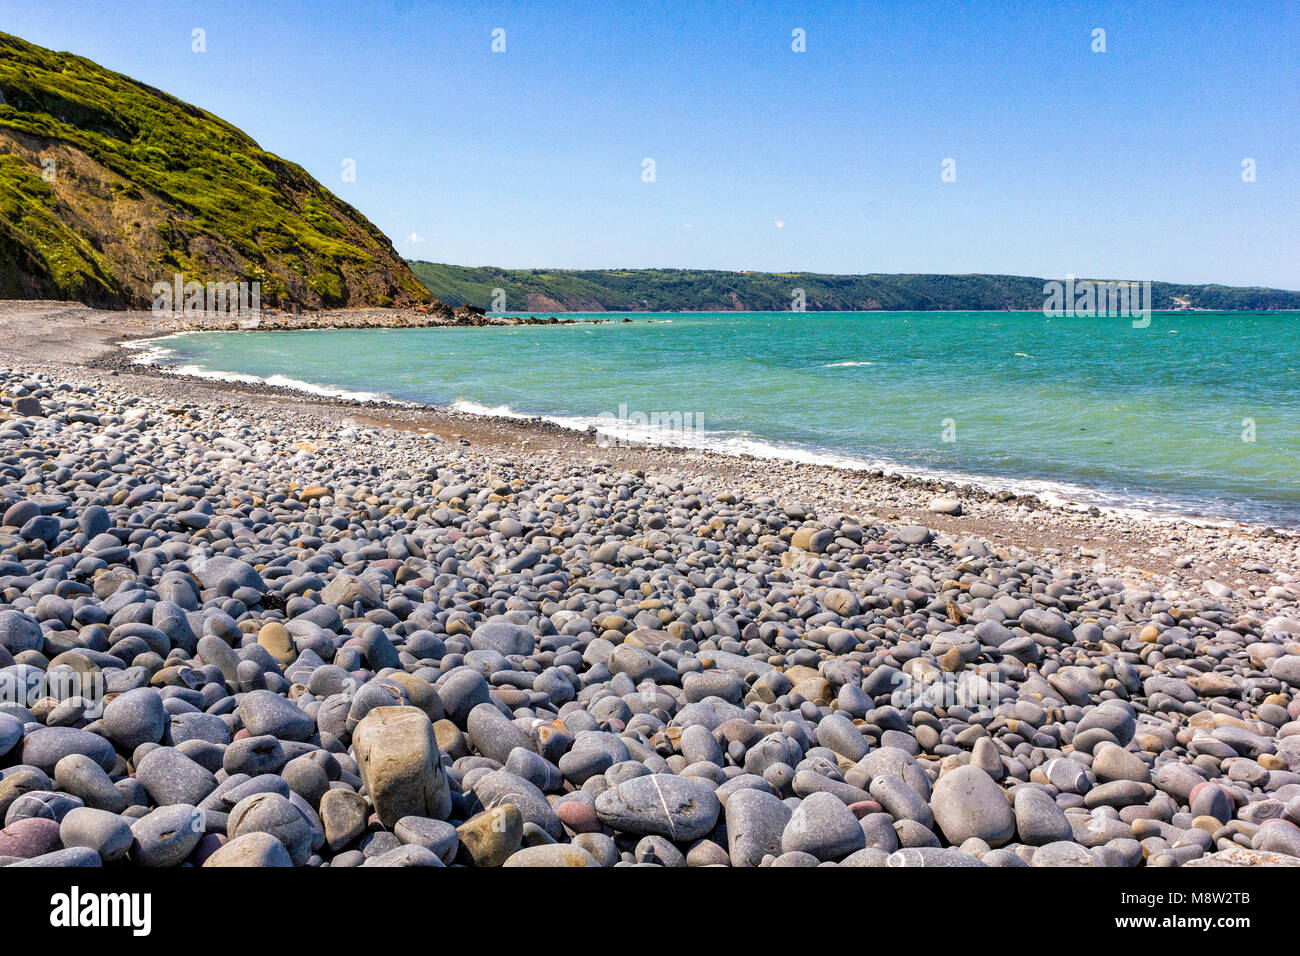 Greencliff Beach - Pebble View at Mid Tide, Looking South West towards Bucks Mills & Clovelly: Greencliff Beach, near Bideford, Devon, UK. Stock Photo